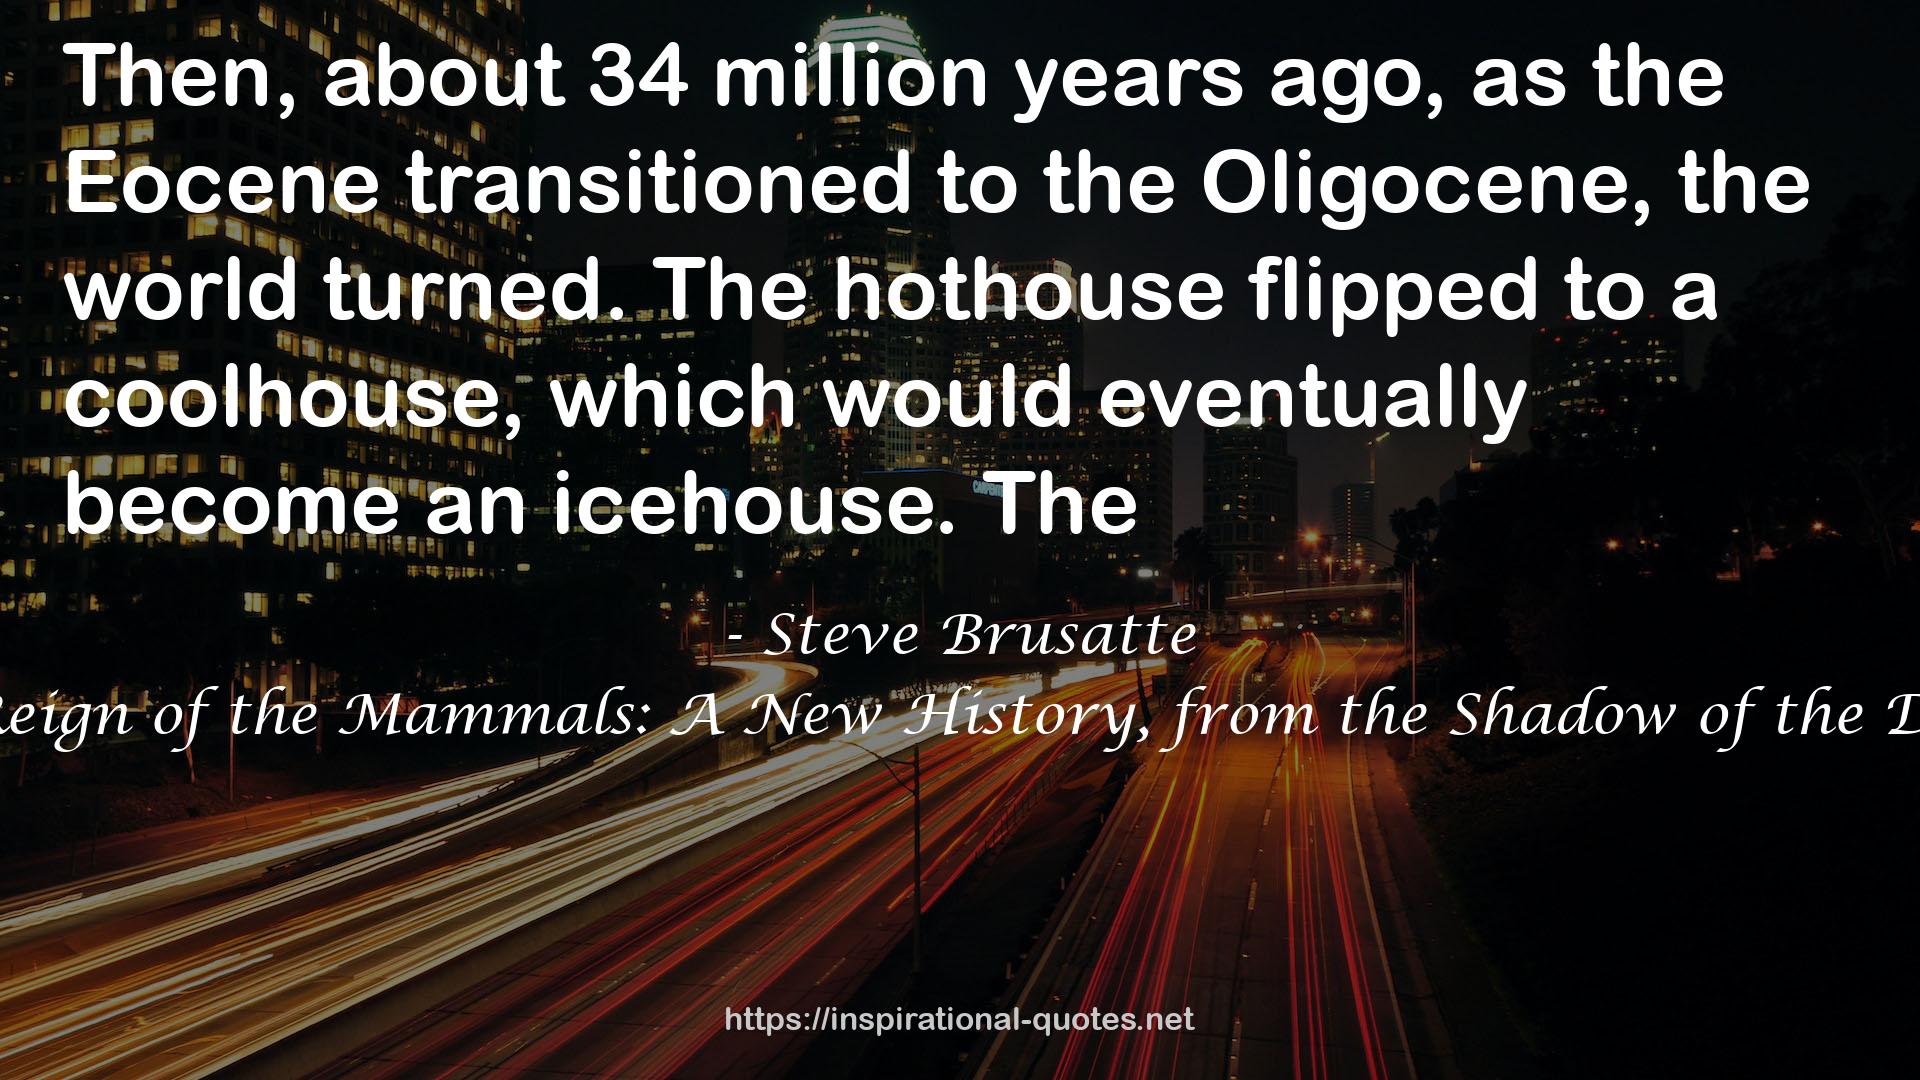 The Rise and Reign of the Mammals: A New History, from the Shadow of the Dinosaurs to Us QUOTES